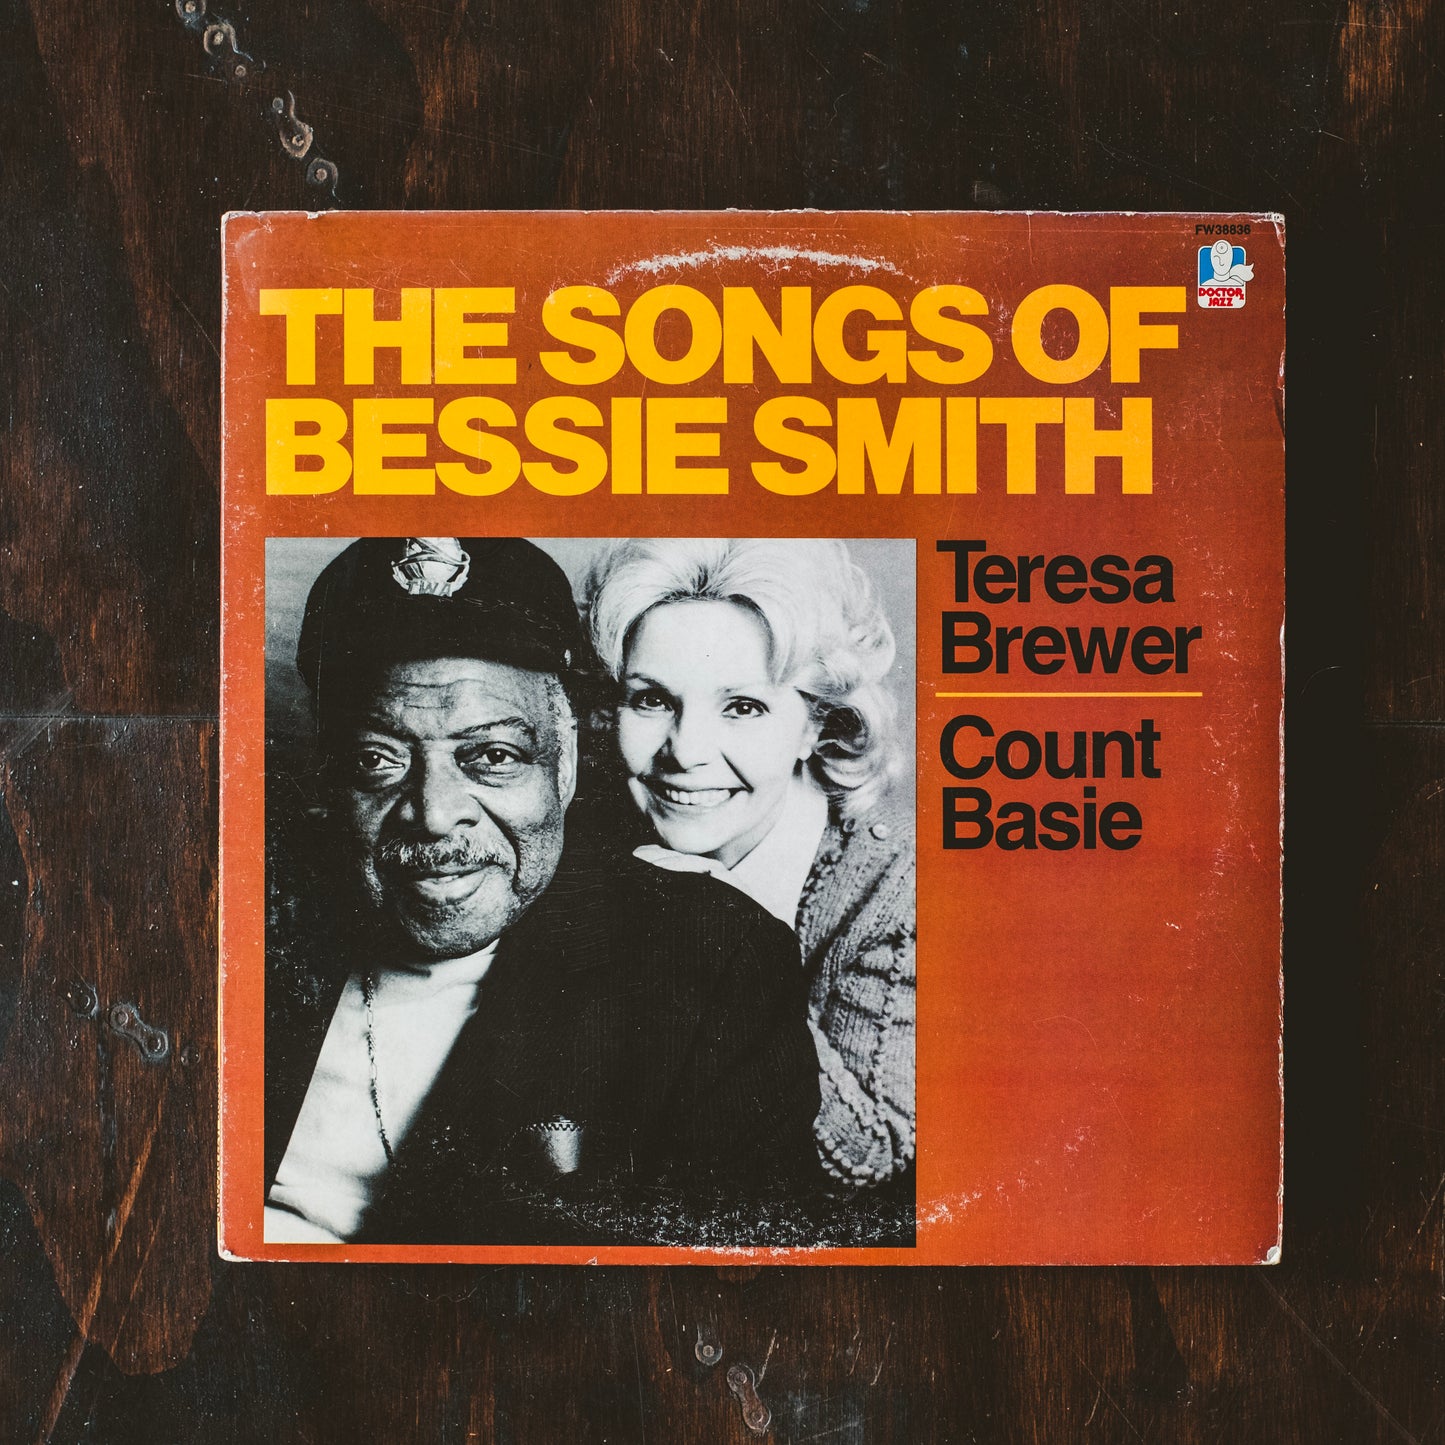 Basie, Count & Brewer, Teresa - The Songs of Bessie Smith (Pre-Loved)